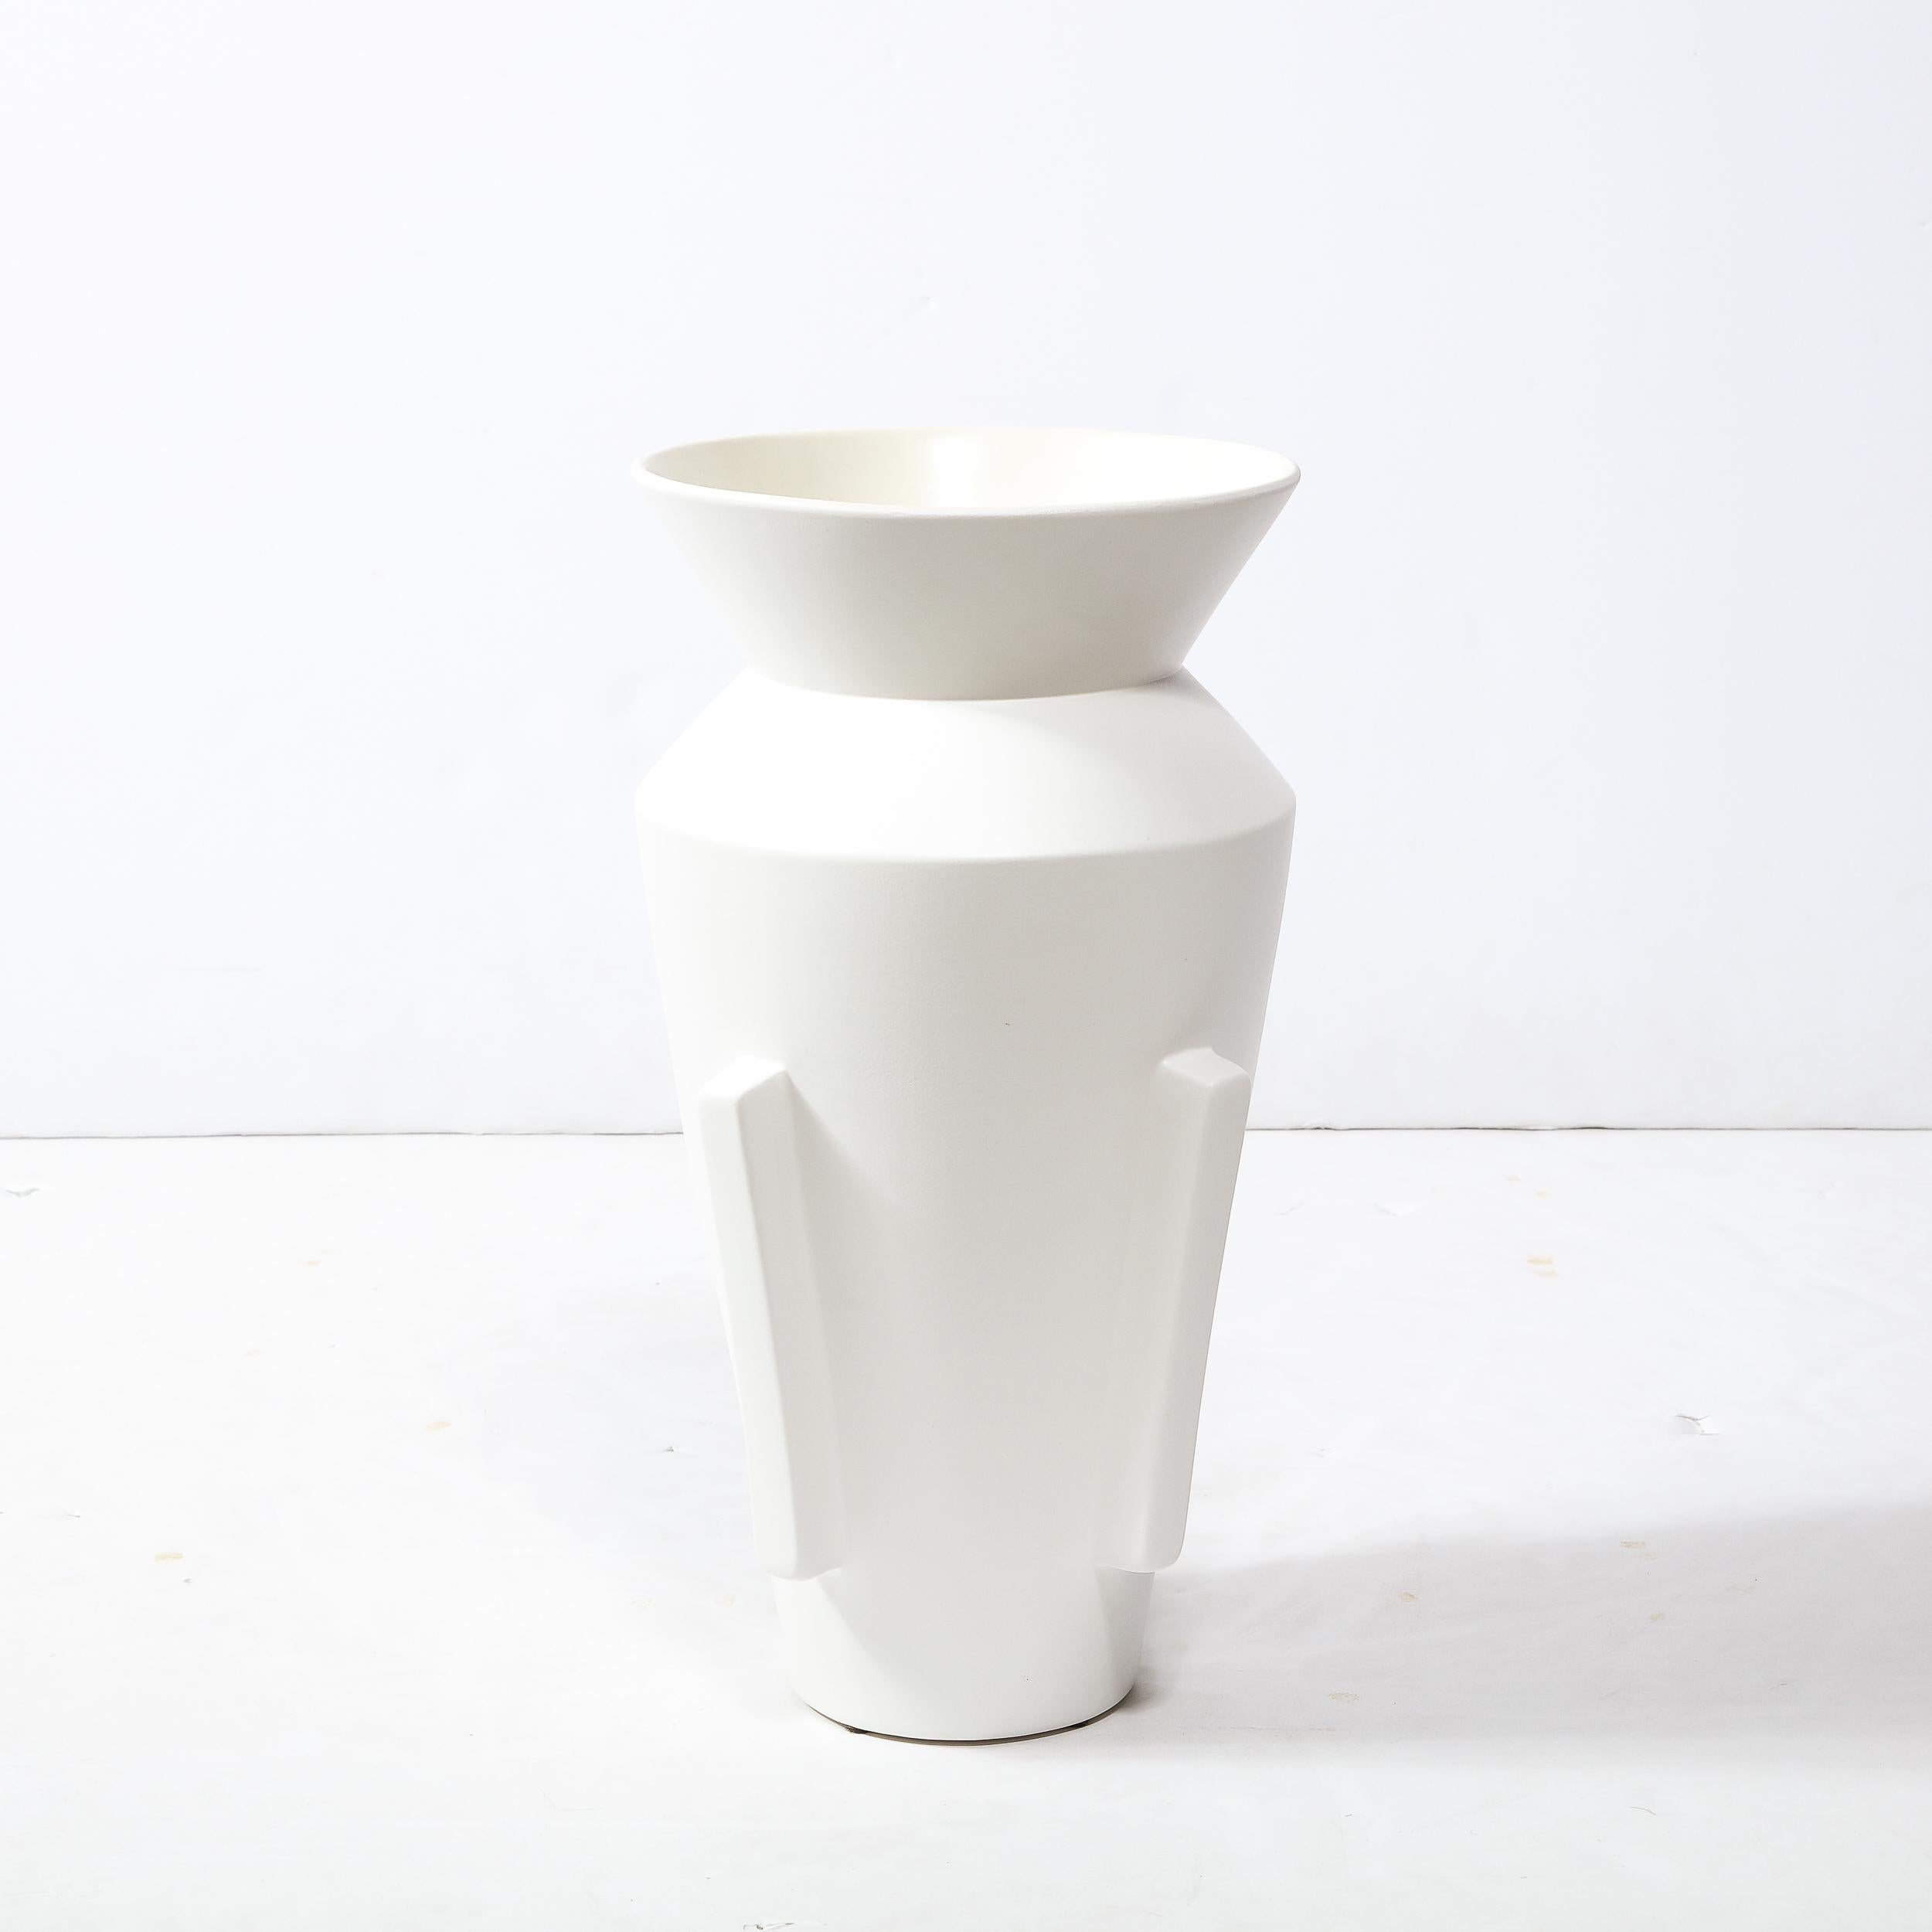 This refined modernist urn form vase was realized in the United States during the latter half of the 20th century. It features a conical body that flares to an angled collar where it recedes meeting the neck that once again flares to a circular